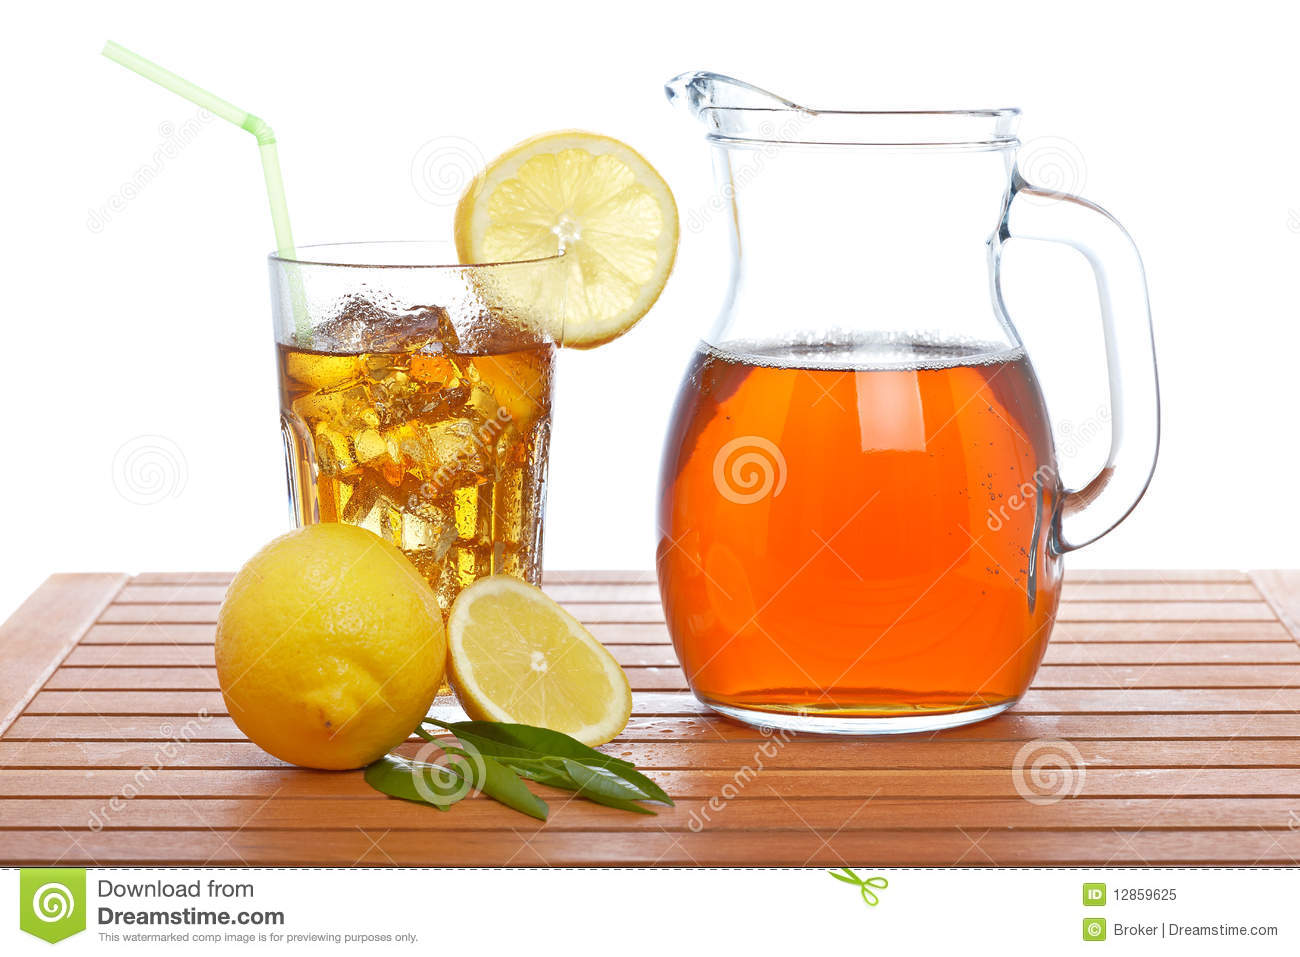 Iced Tea Pitcher Clipart Ice Tea Pitcher And Tumbler Royalty Free